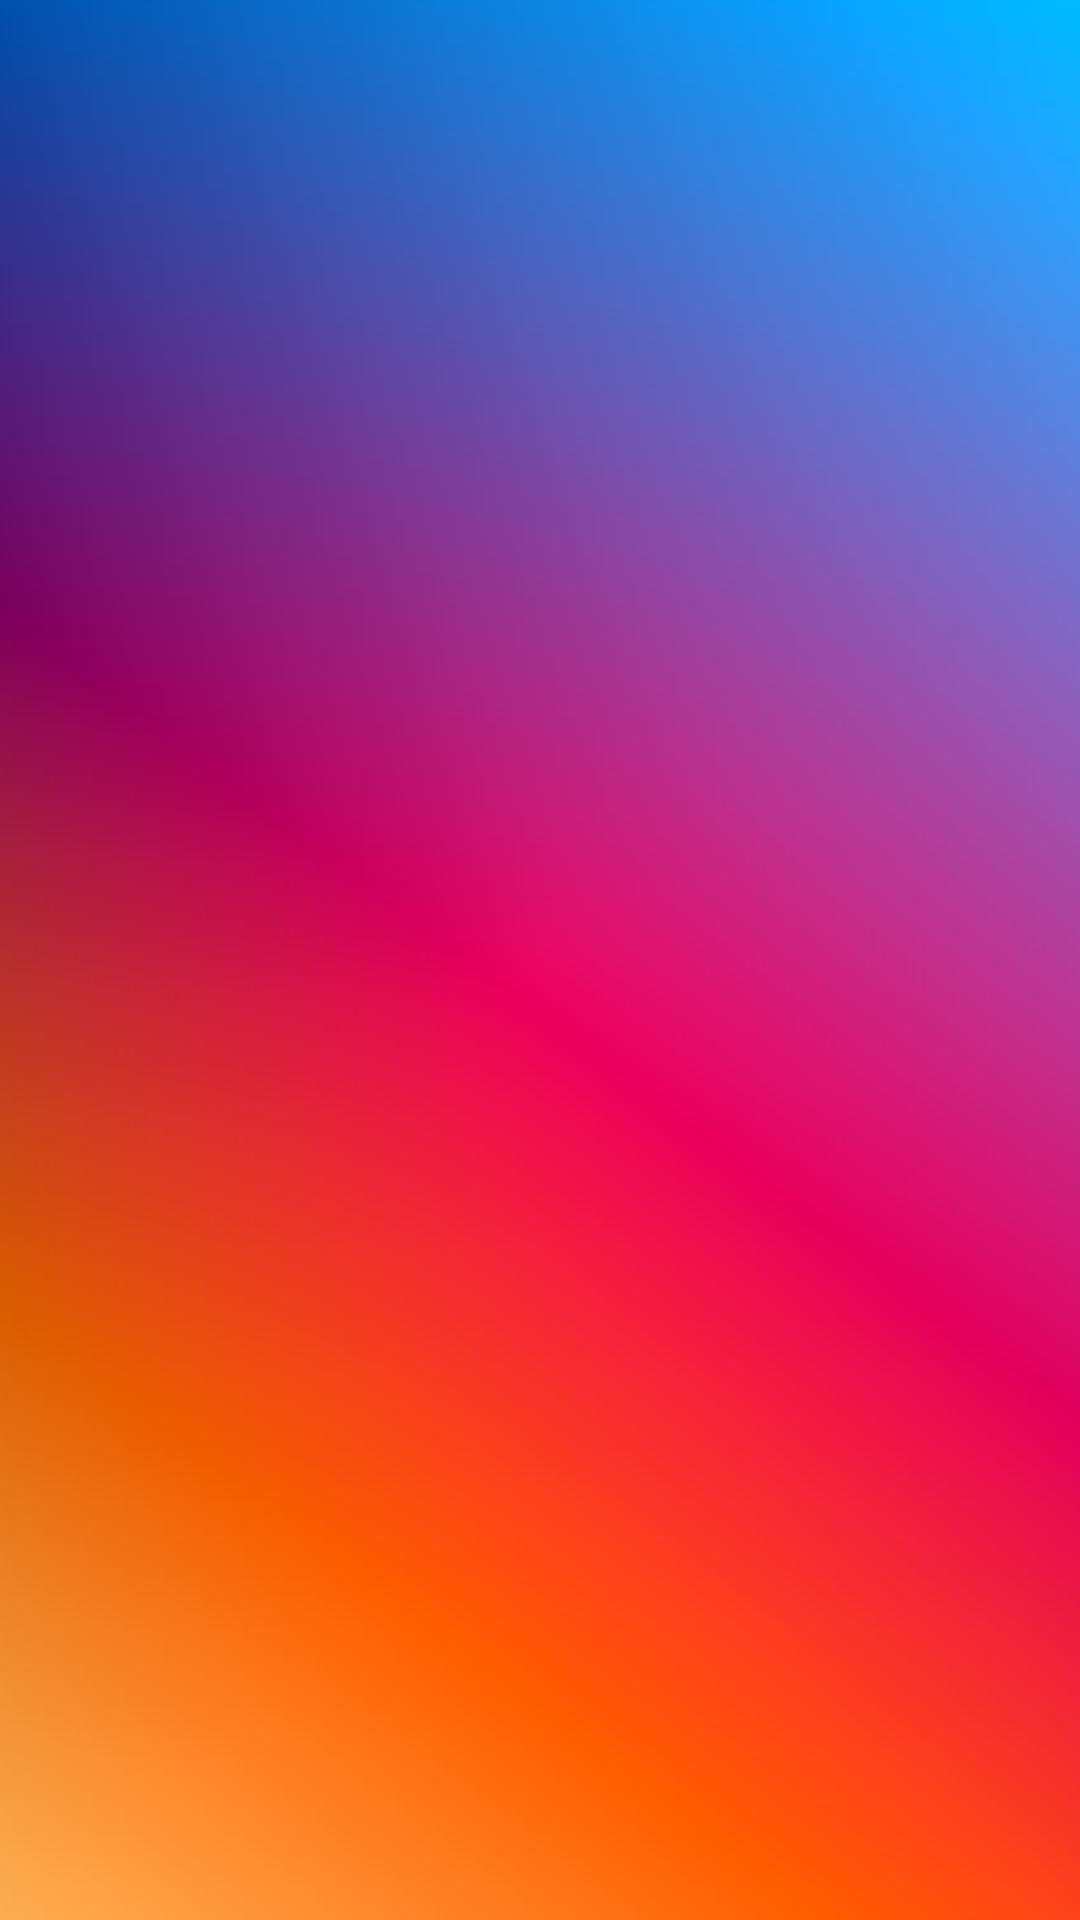 50 Bright Phone Wallpaper HD Backgrounds For Andriod And iOS